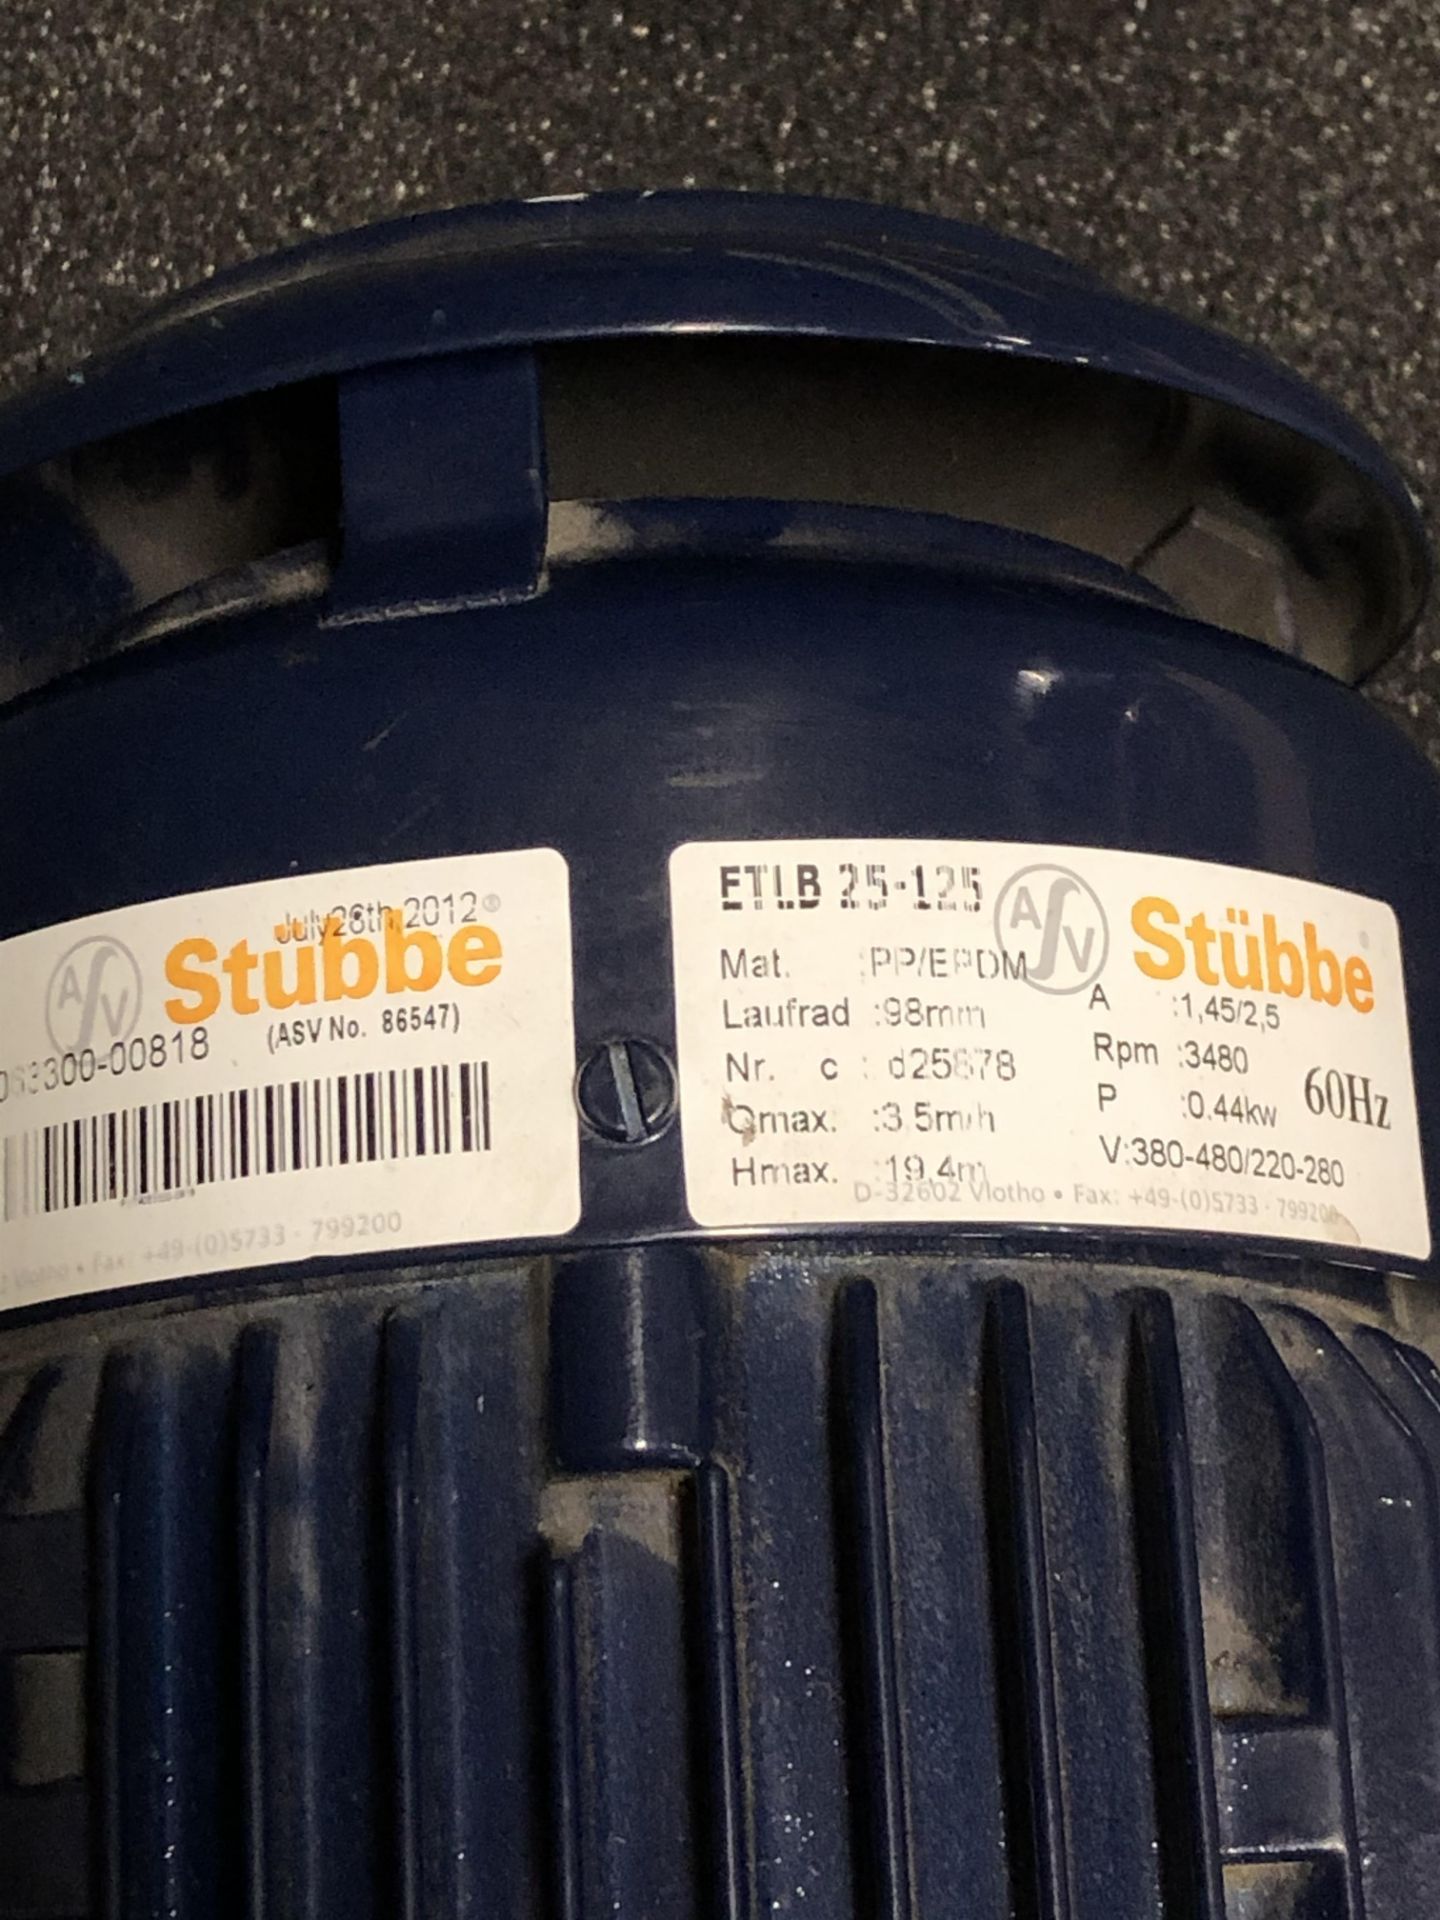 LOT OF 2 - SCHMID BY STUBBE ETLB-25-125 VERTICAL SINGLE-STAGE IMMERSION PUMP, 0.44kw, Qmax = 3.5 M3/ - Image 5 of 5